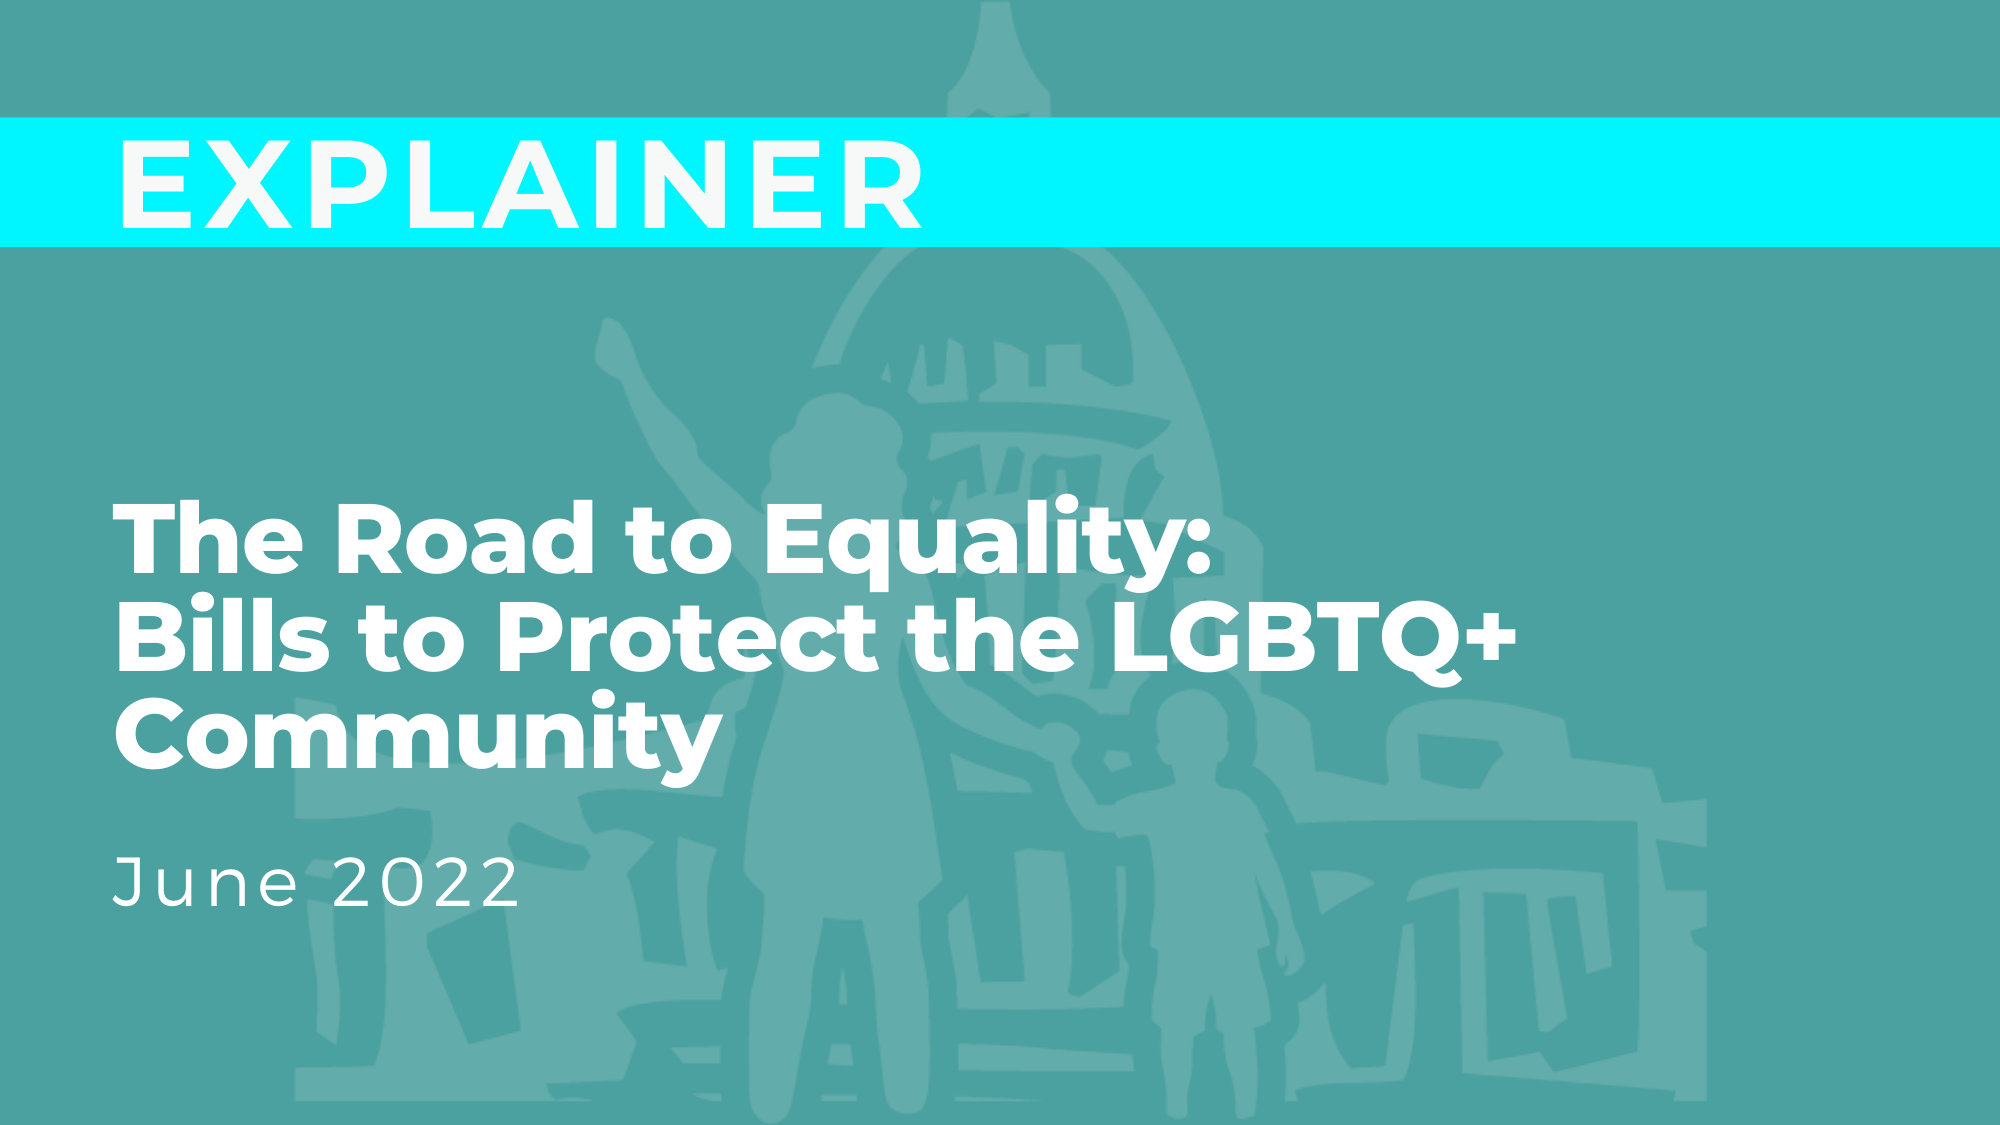 The Road to Equality: Bills to Protect the LGBTQ+ Community